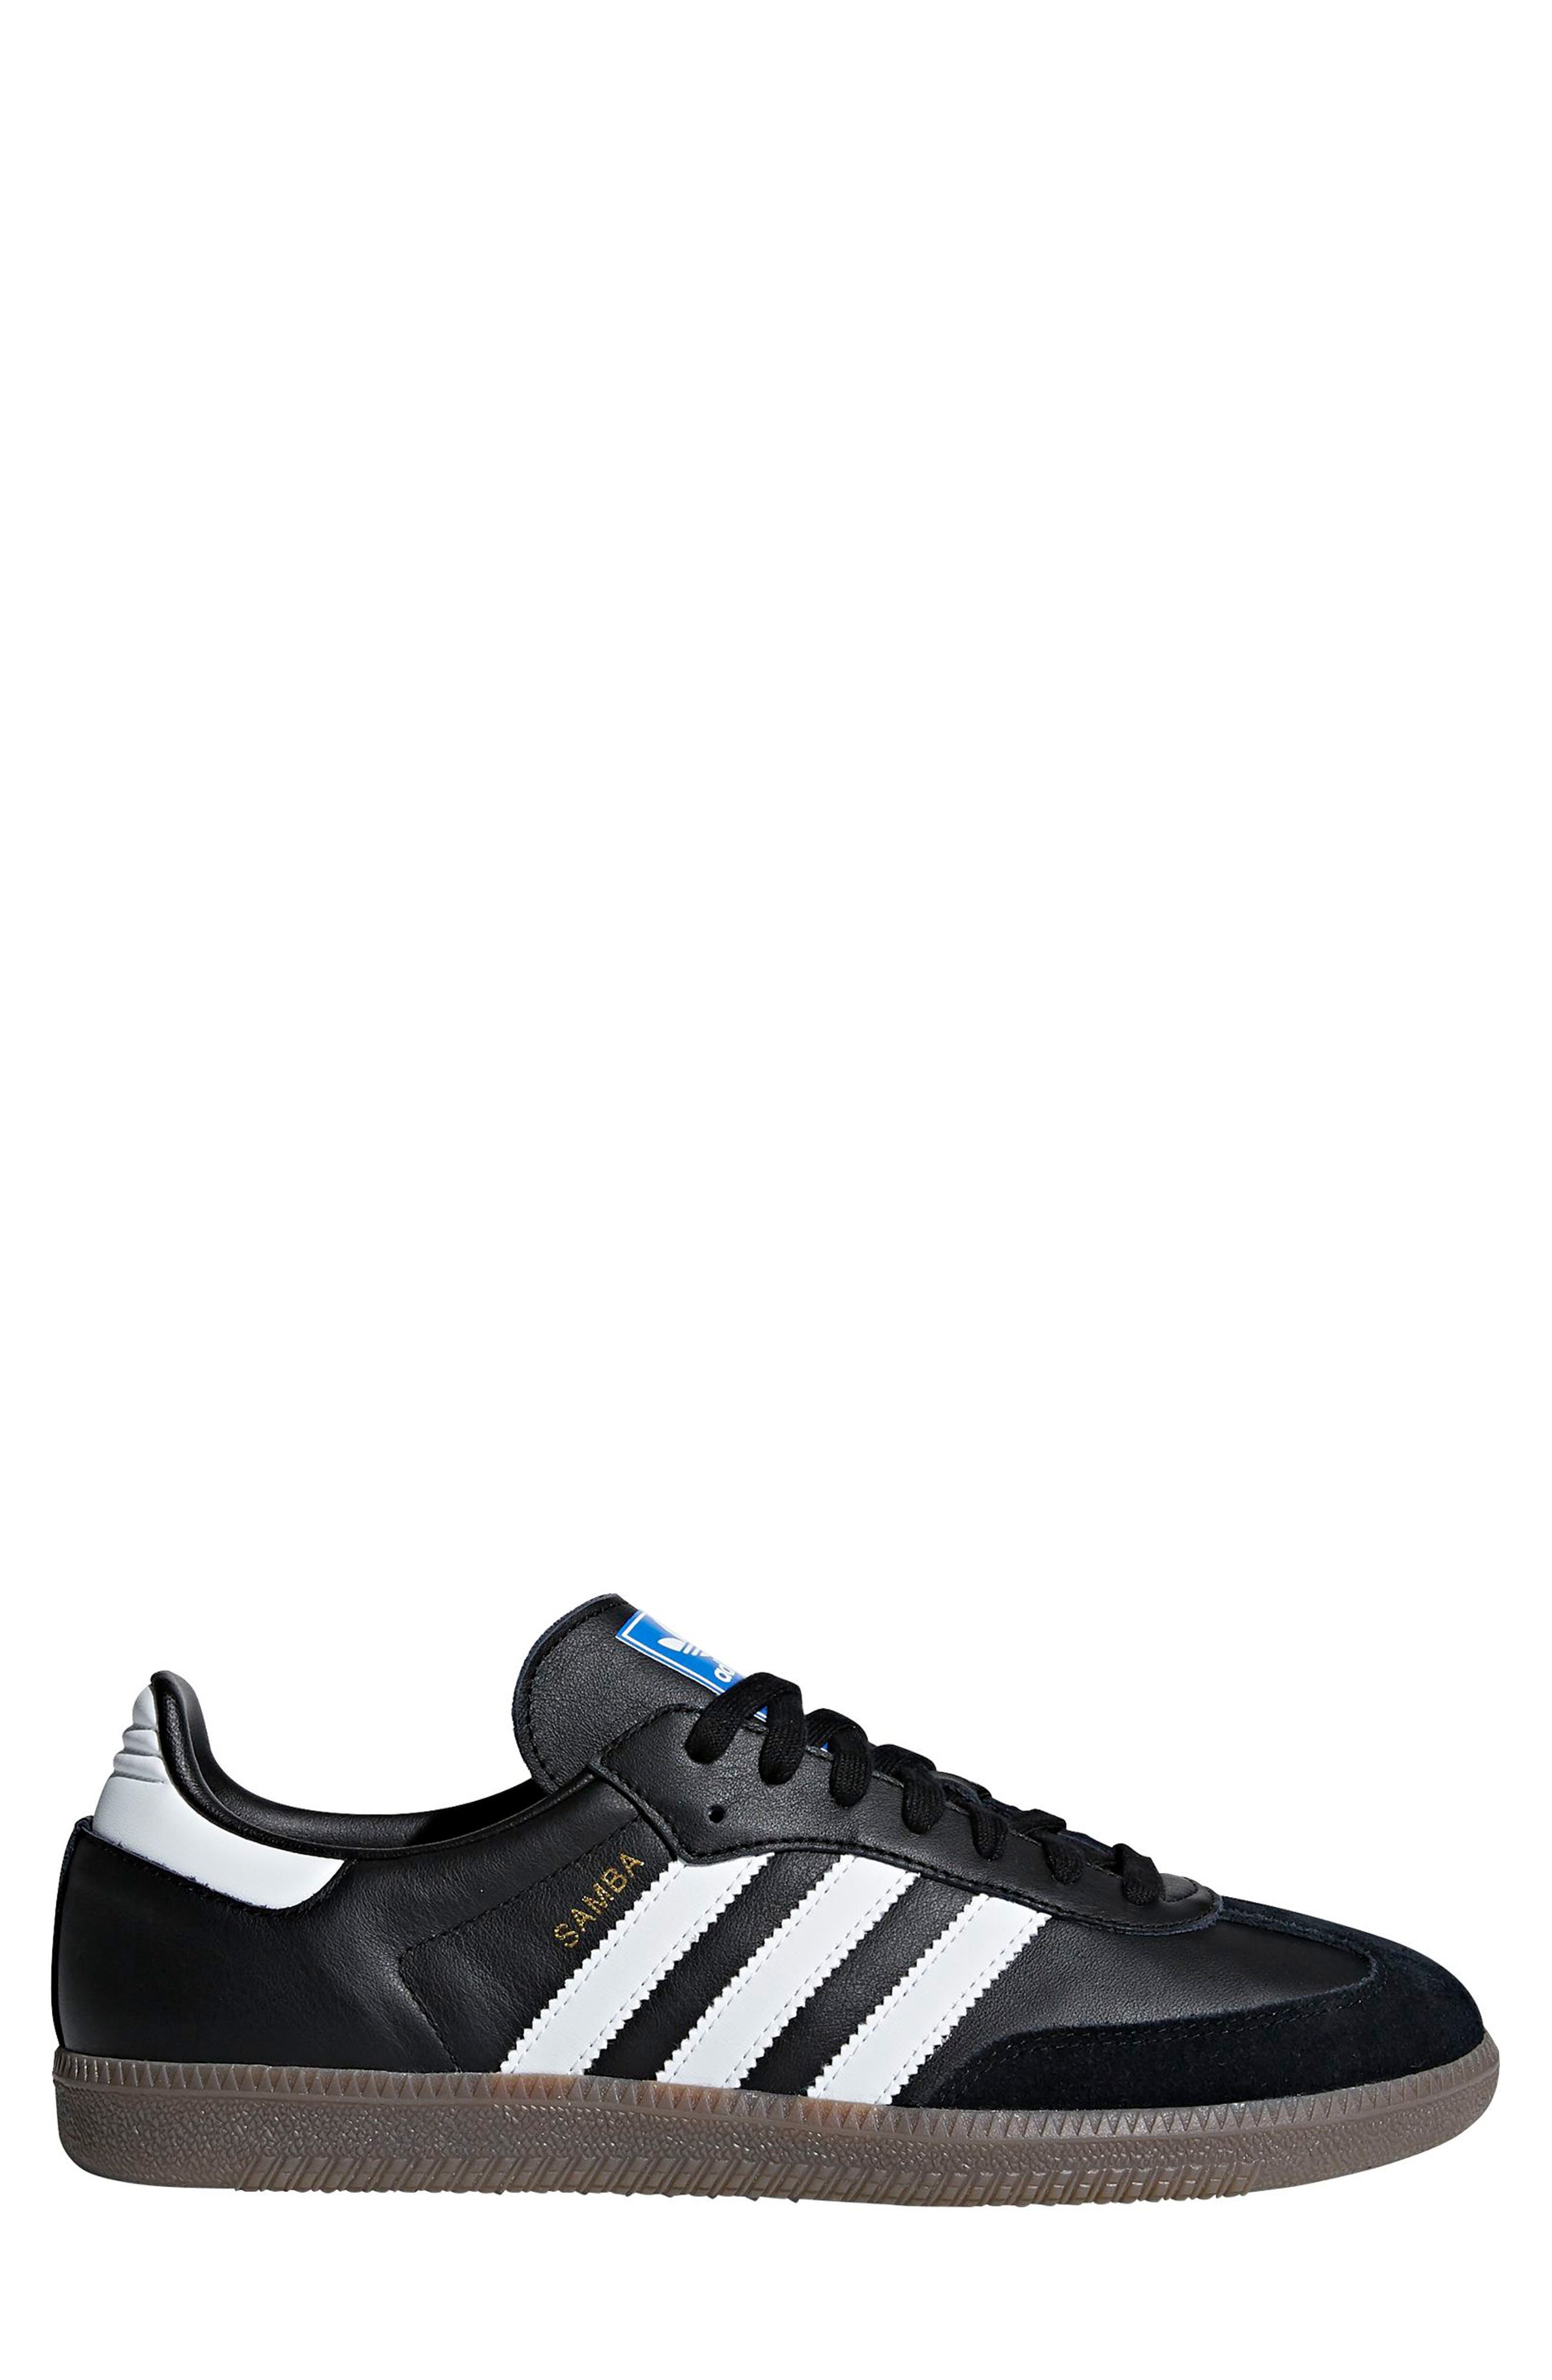 adidas mens shoes nordstrom